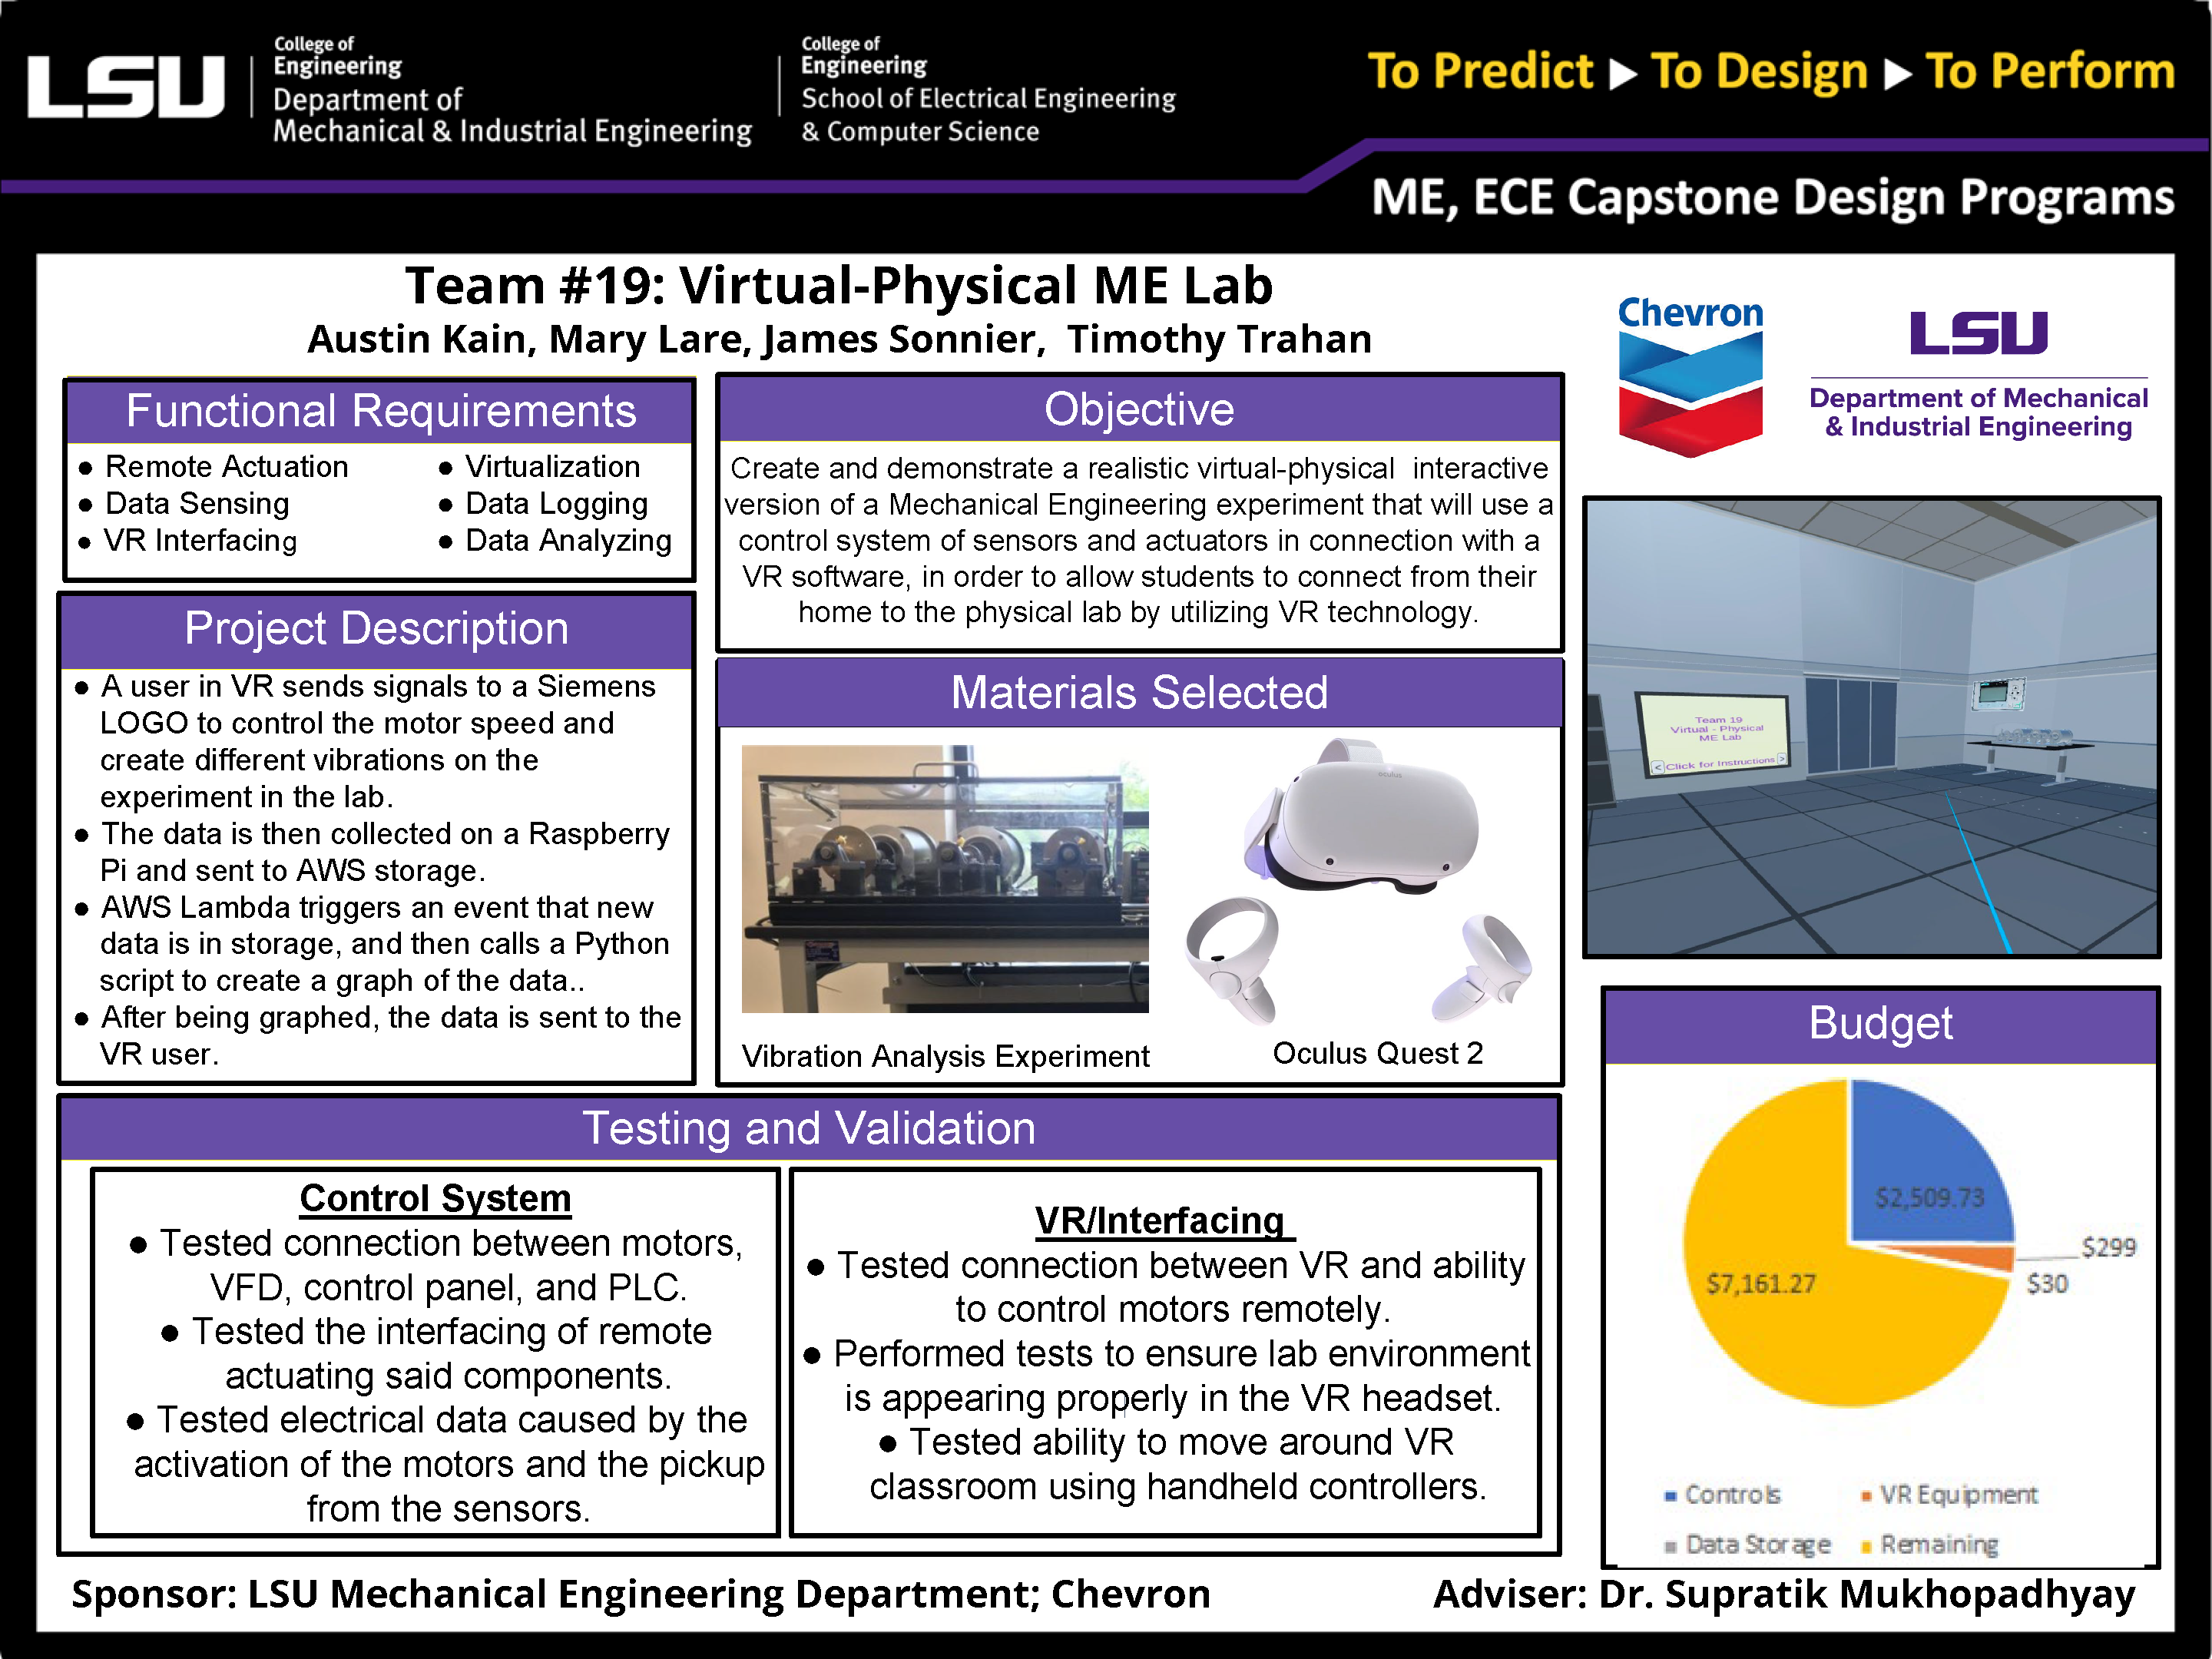 Project 19: Virtual-Physical ME Lab (2021)